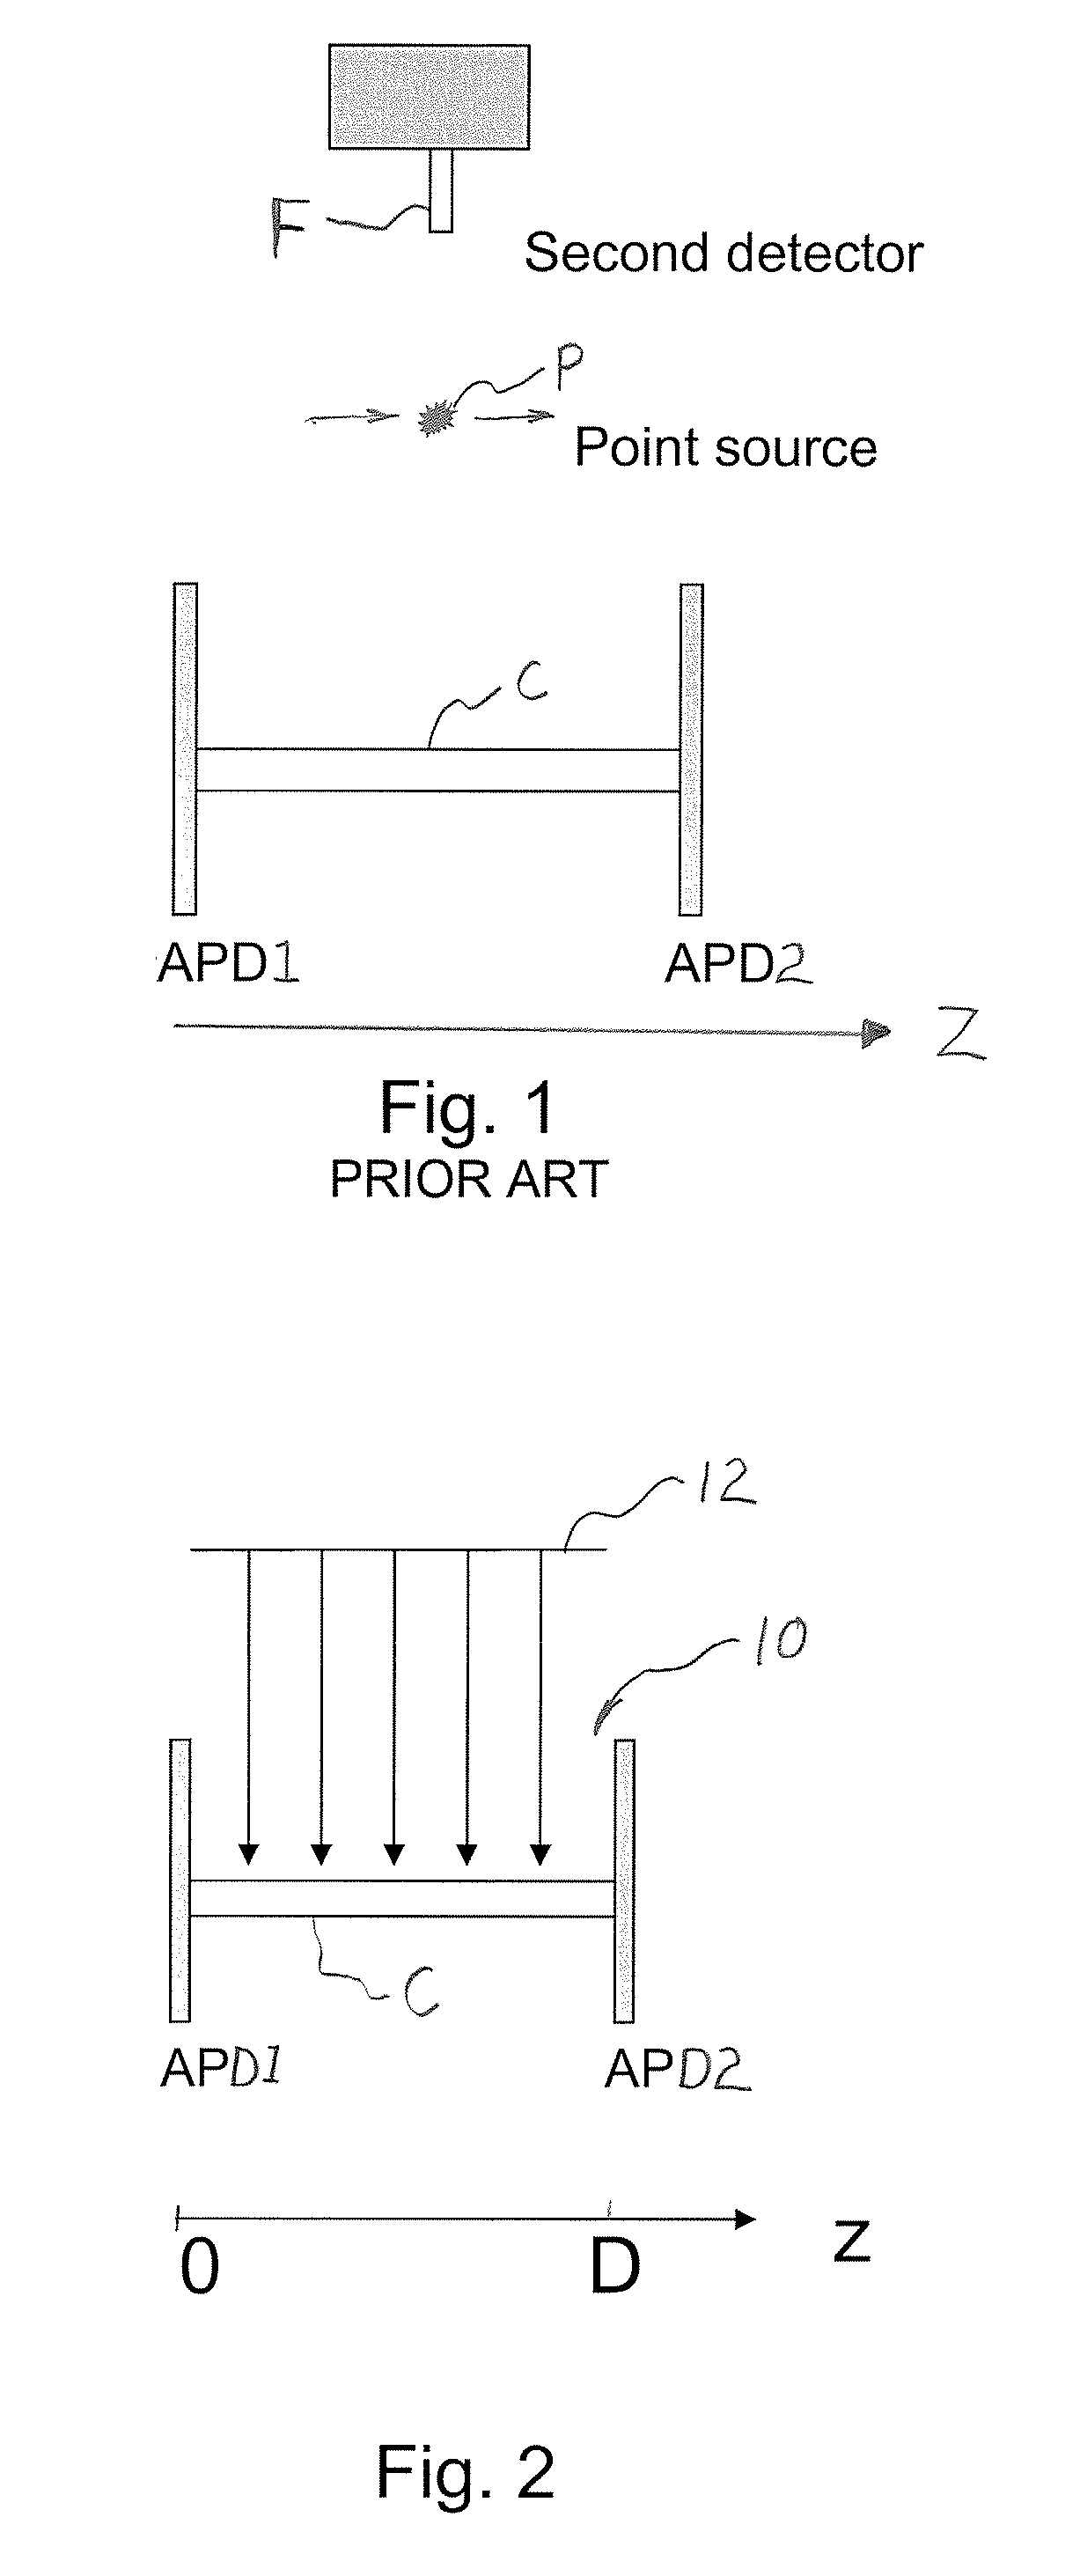 Method To Determine The Depth-Of-Interaction Function For PET Detectors